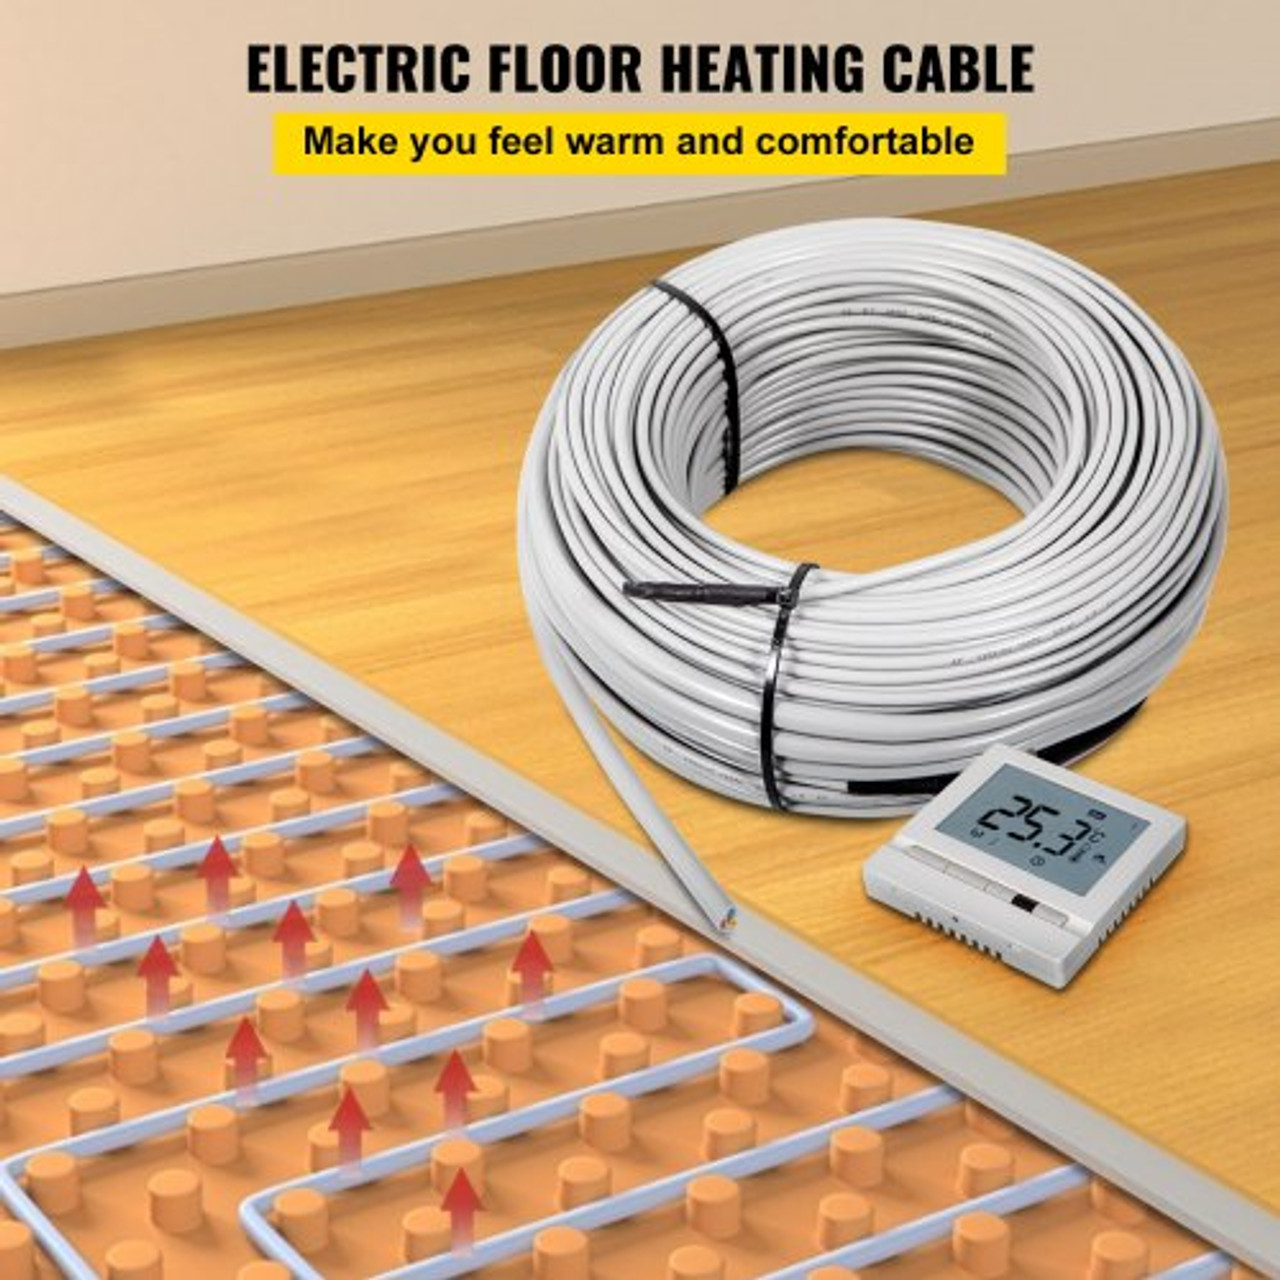 Ditra Floor Heating Cable,475W 120V Floor Tile Heat Cable,124.1 FT Long,37.5 sqft,with Convenient Temperature Control Panel,No Noise or Radiation